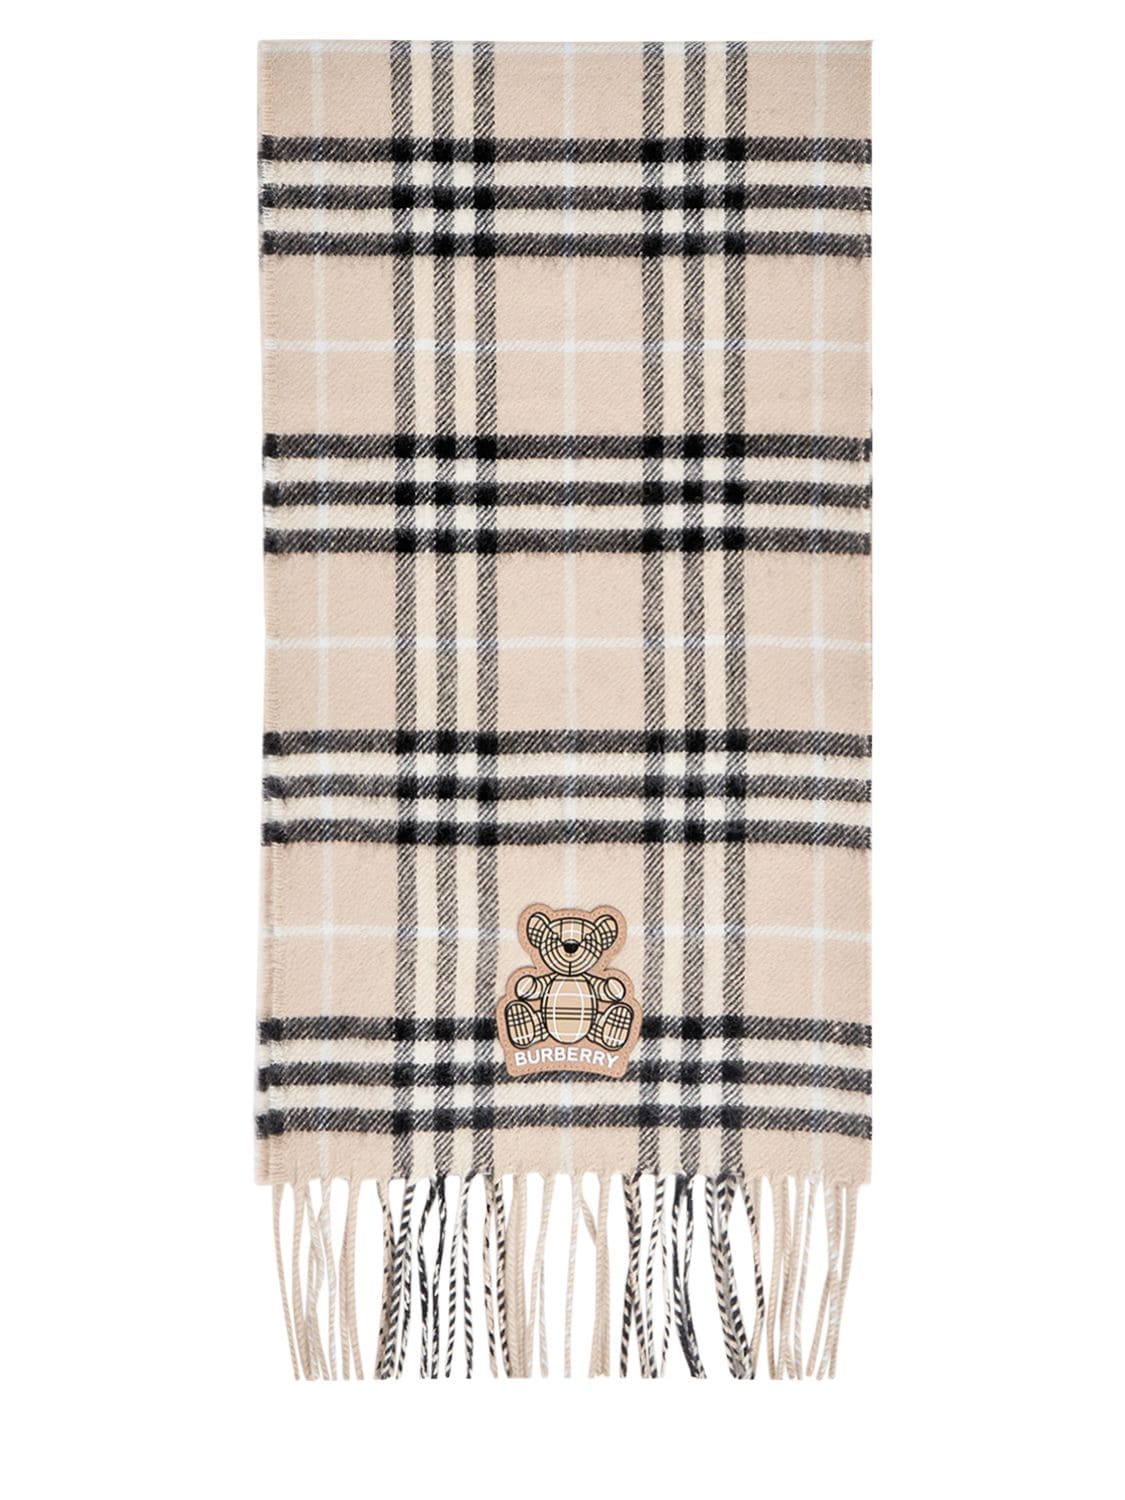 Fringed Cashmere Scarf W/ Bear Patch Luisaviaroma Girls Accessories Scarves 